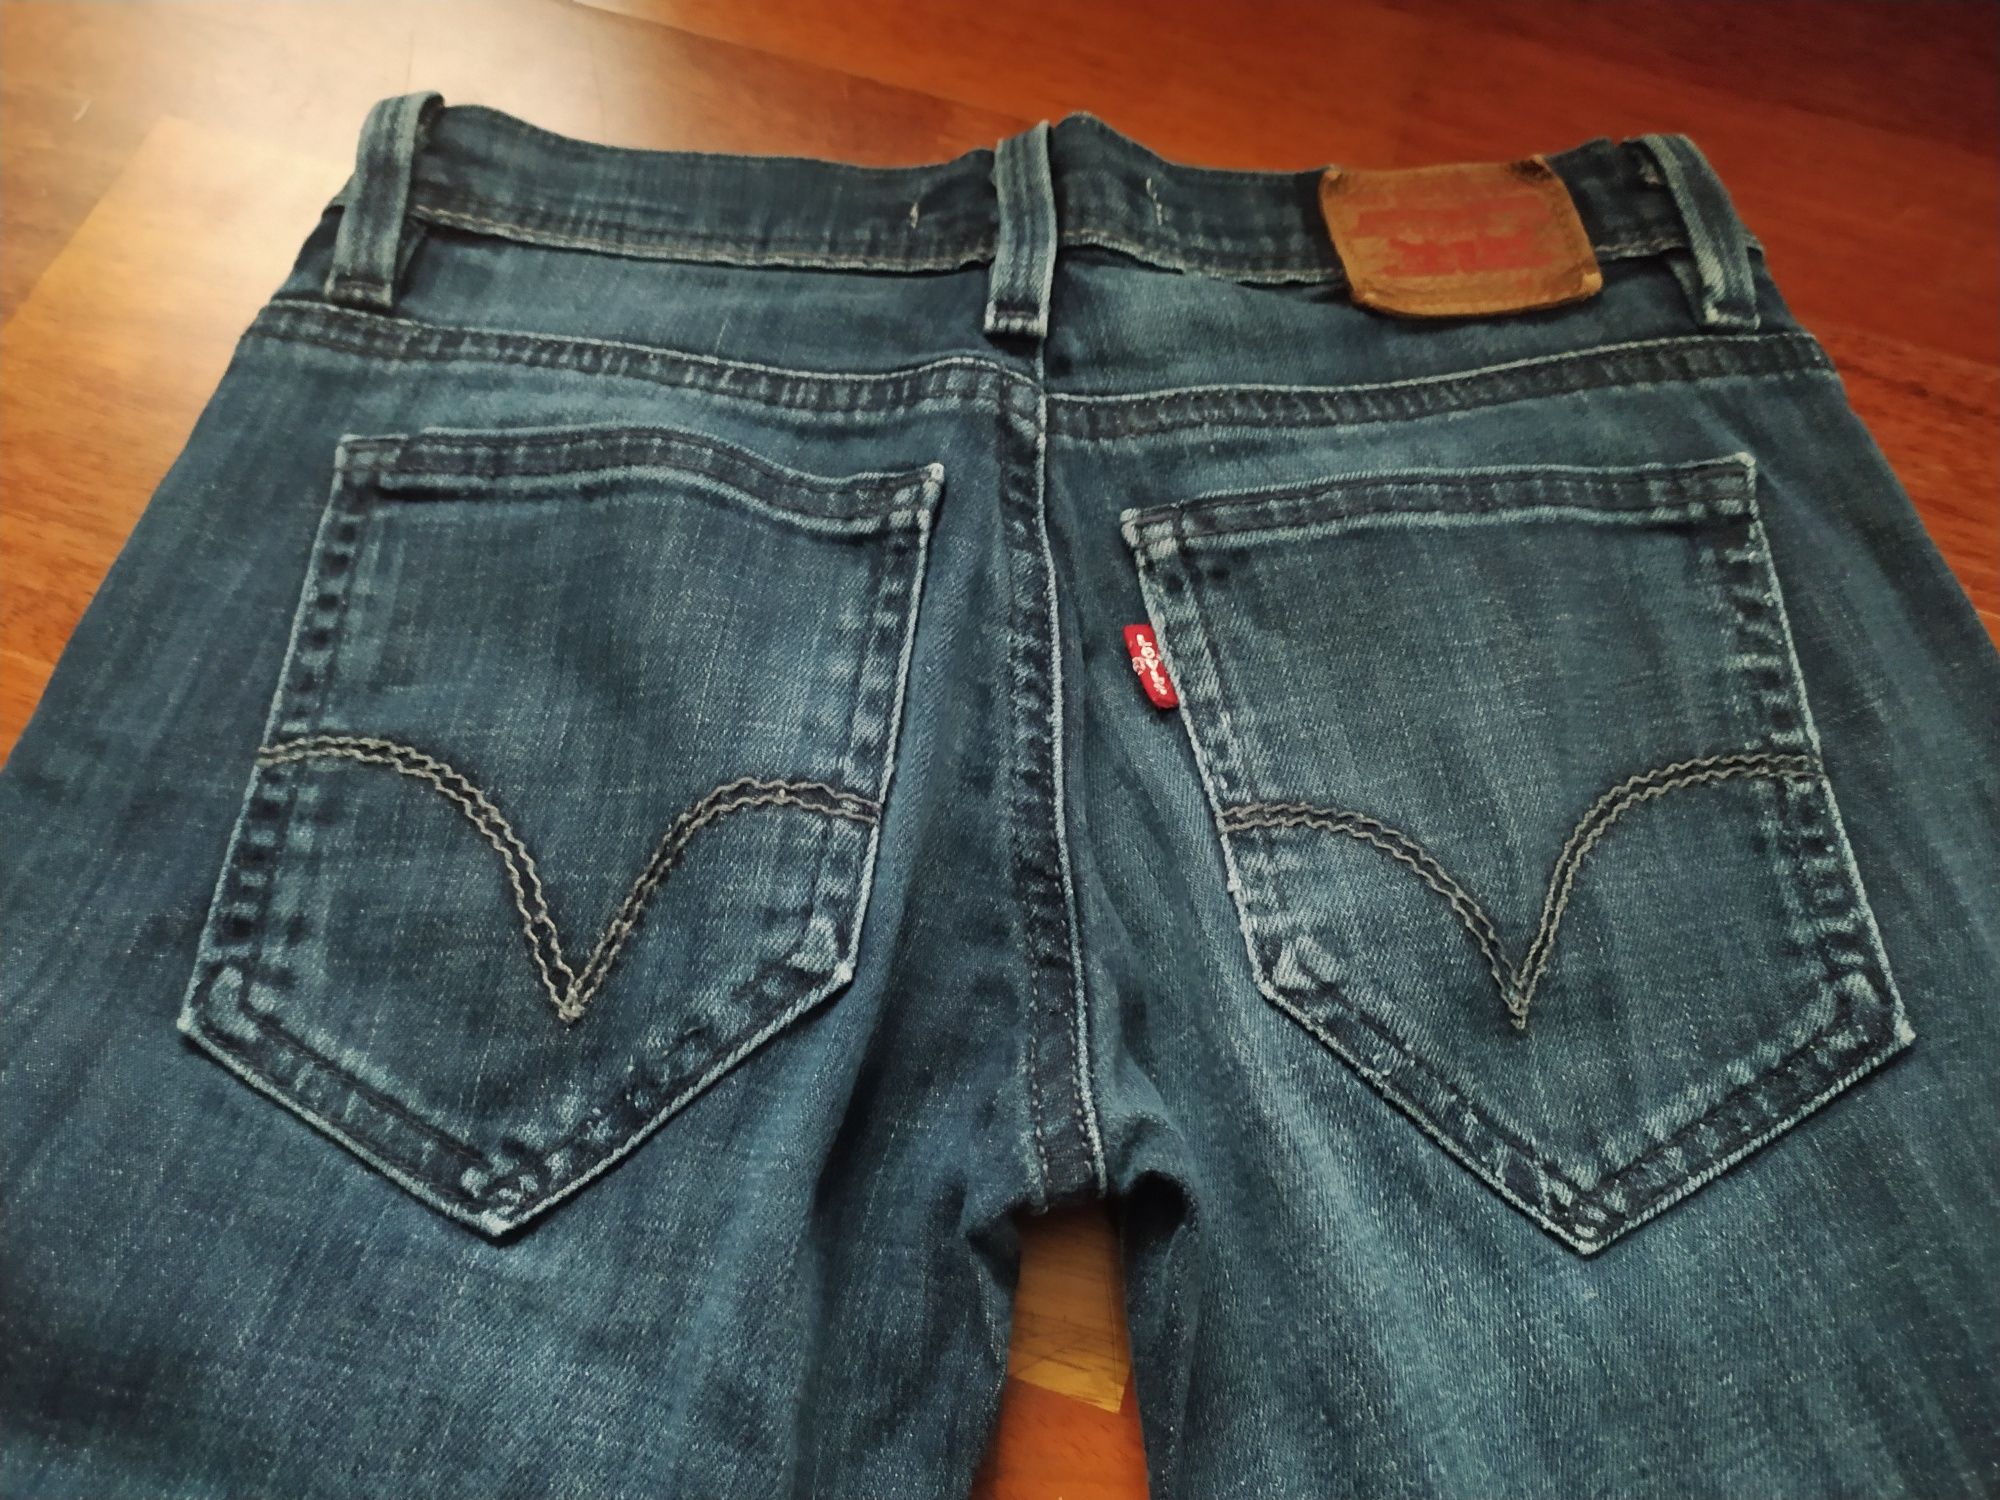 Levis jeans 493 skinny fit